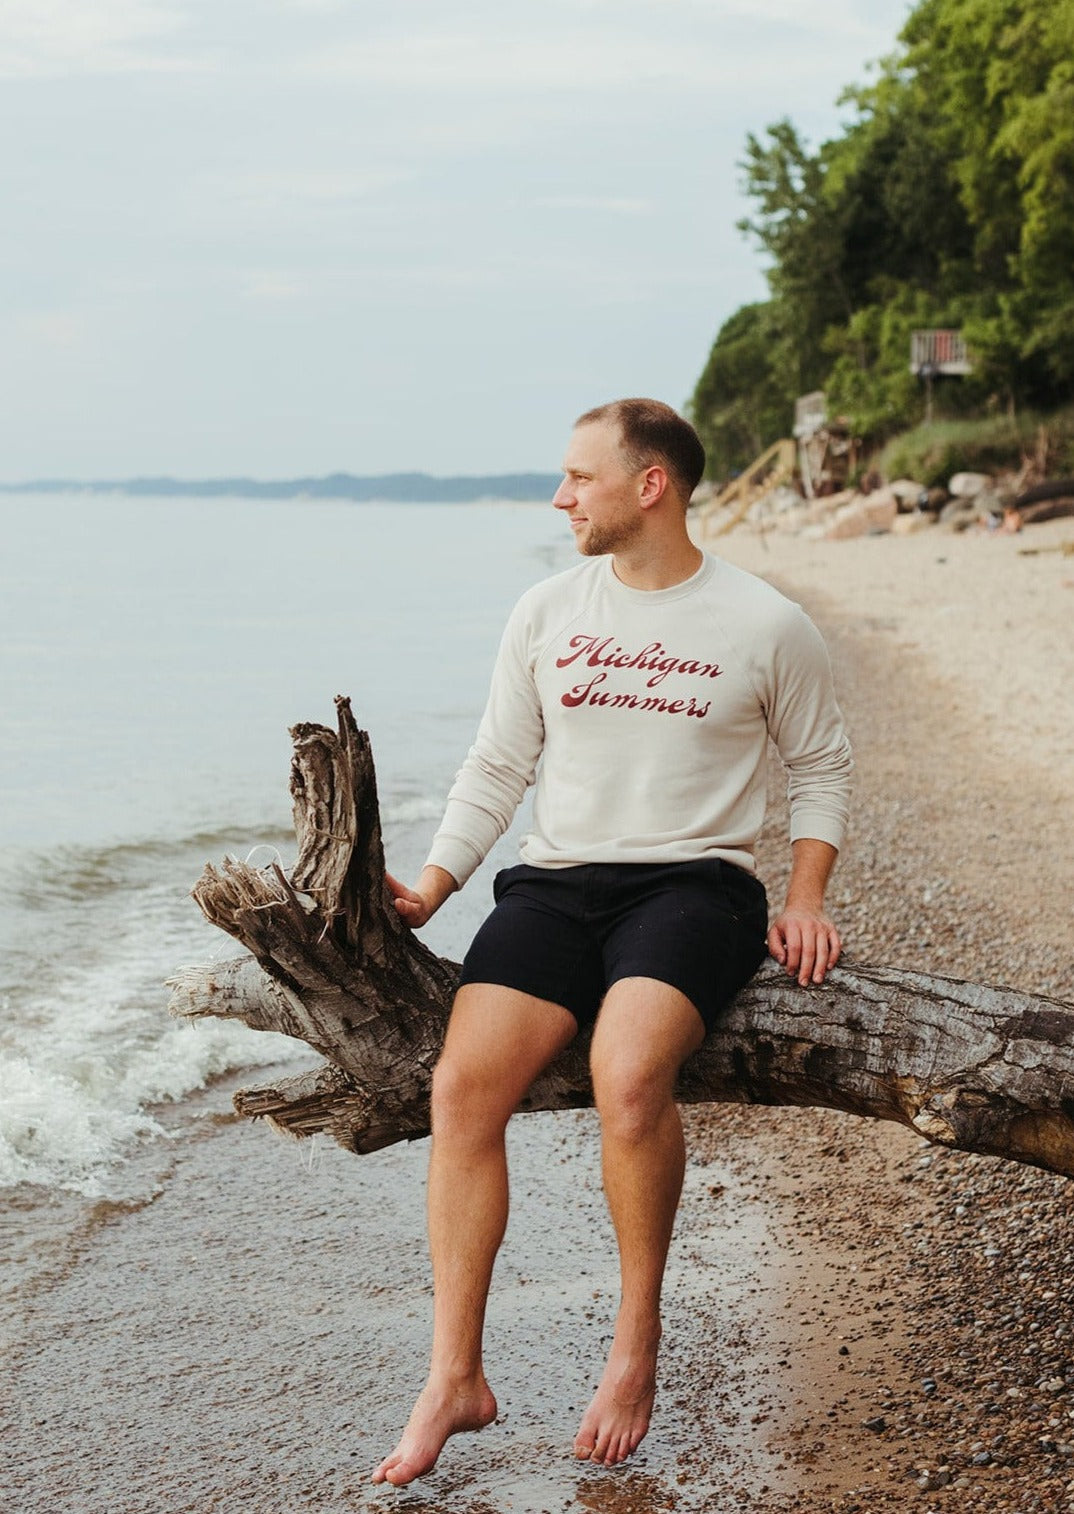 Male model wearing a cream crewneck sweatshirt with Michigan Summers screen-printed on it.